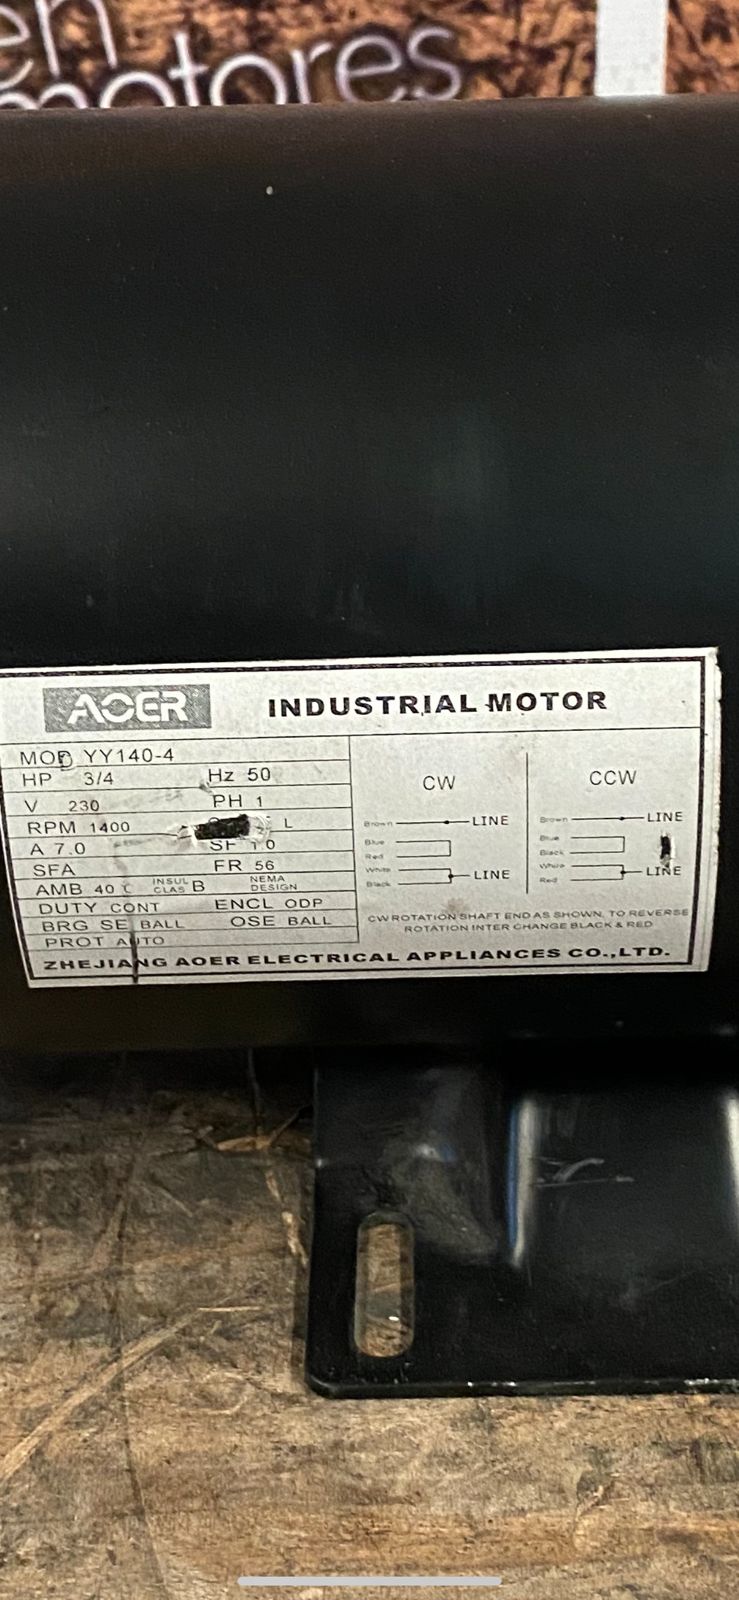 videos/BS003-motor_electrico_acer___3-4_hp__1400_rpm__230_volts-5jpg